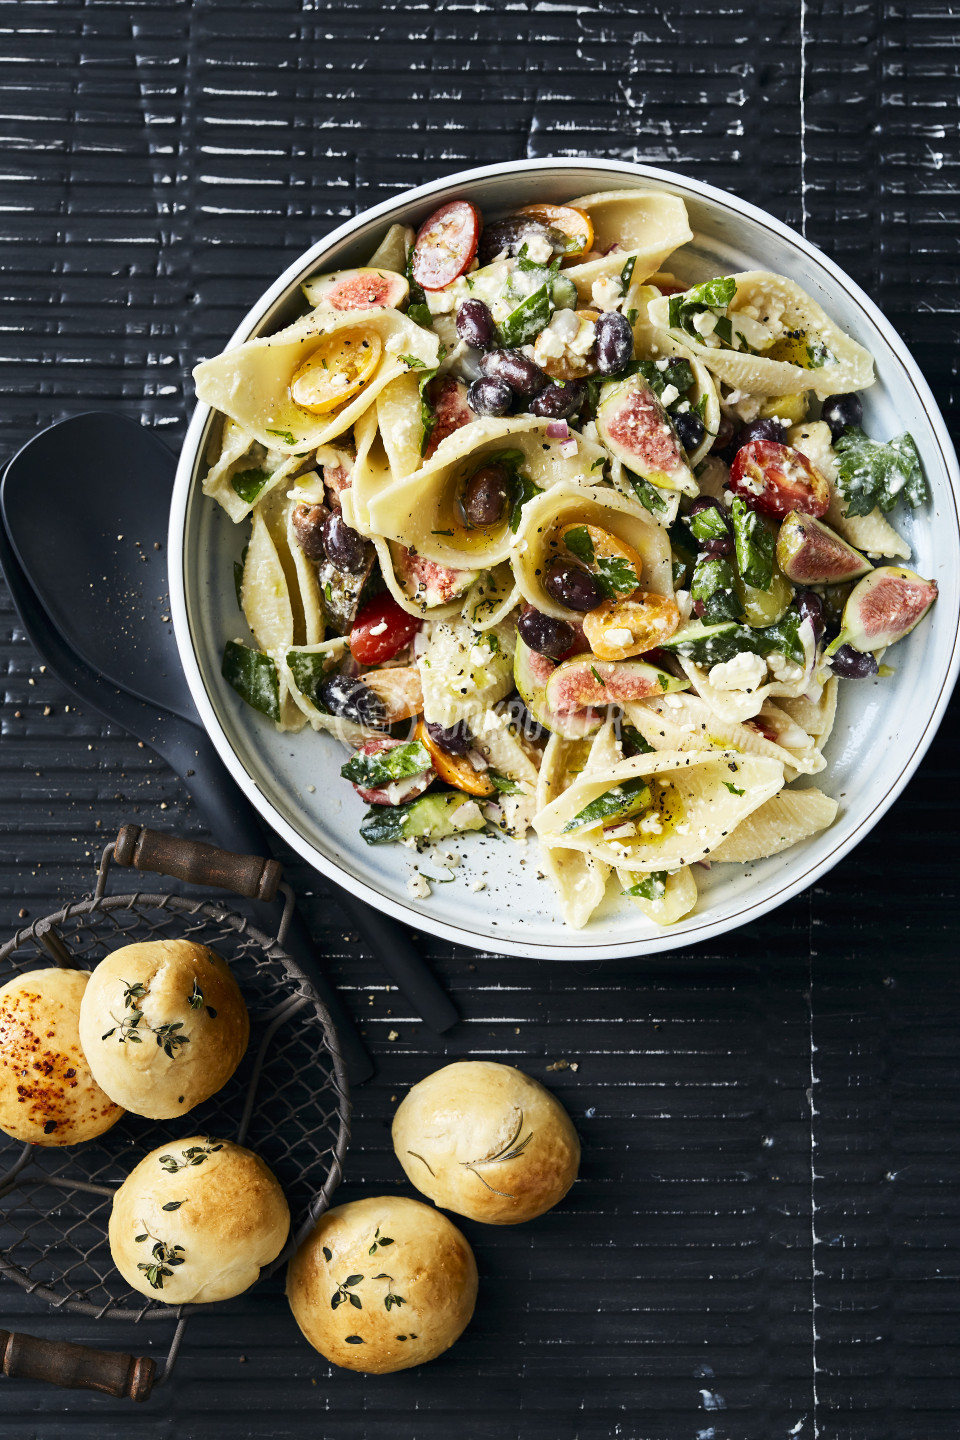 Conchiglioni salad with figs, olives and feta dressing | preview